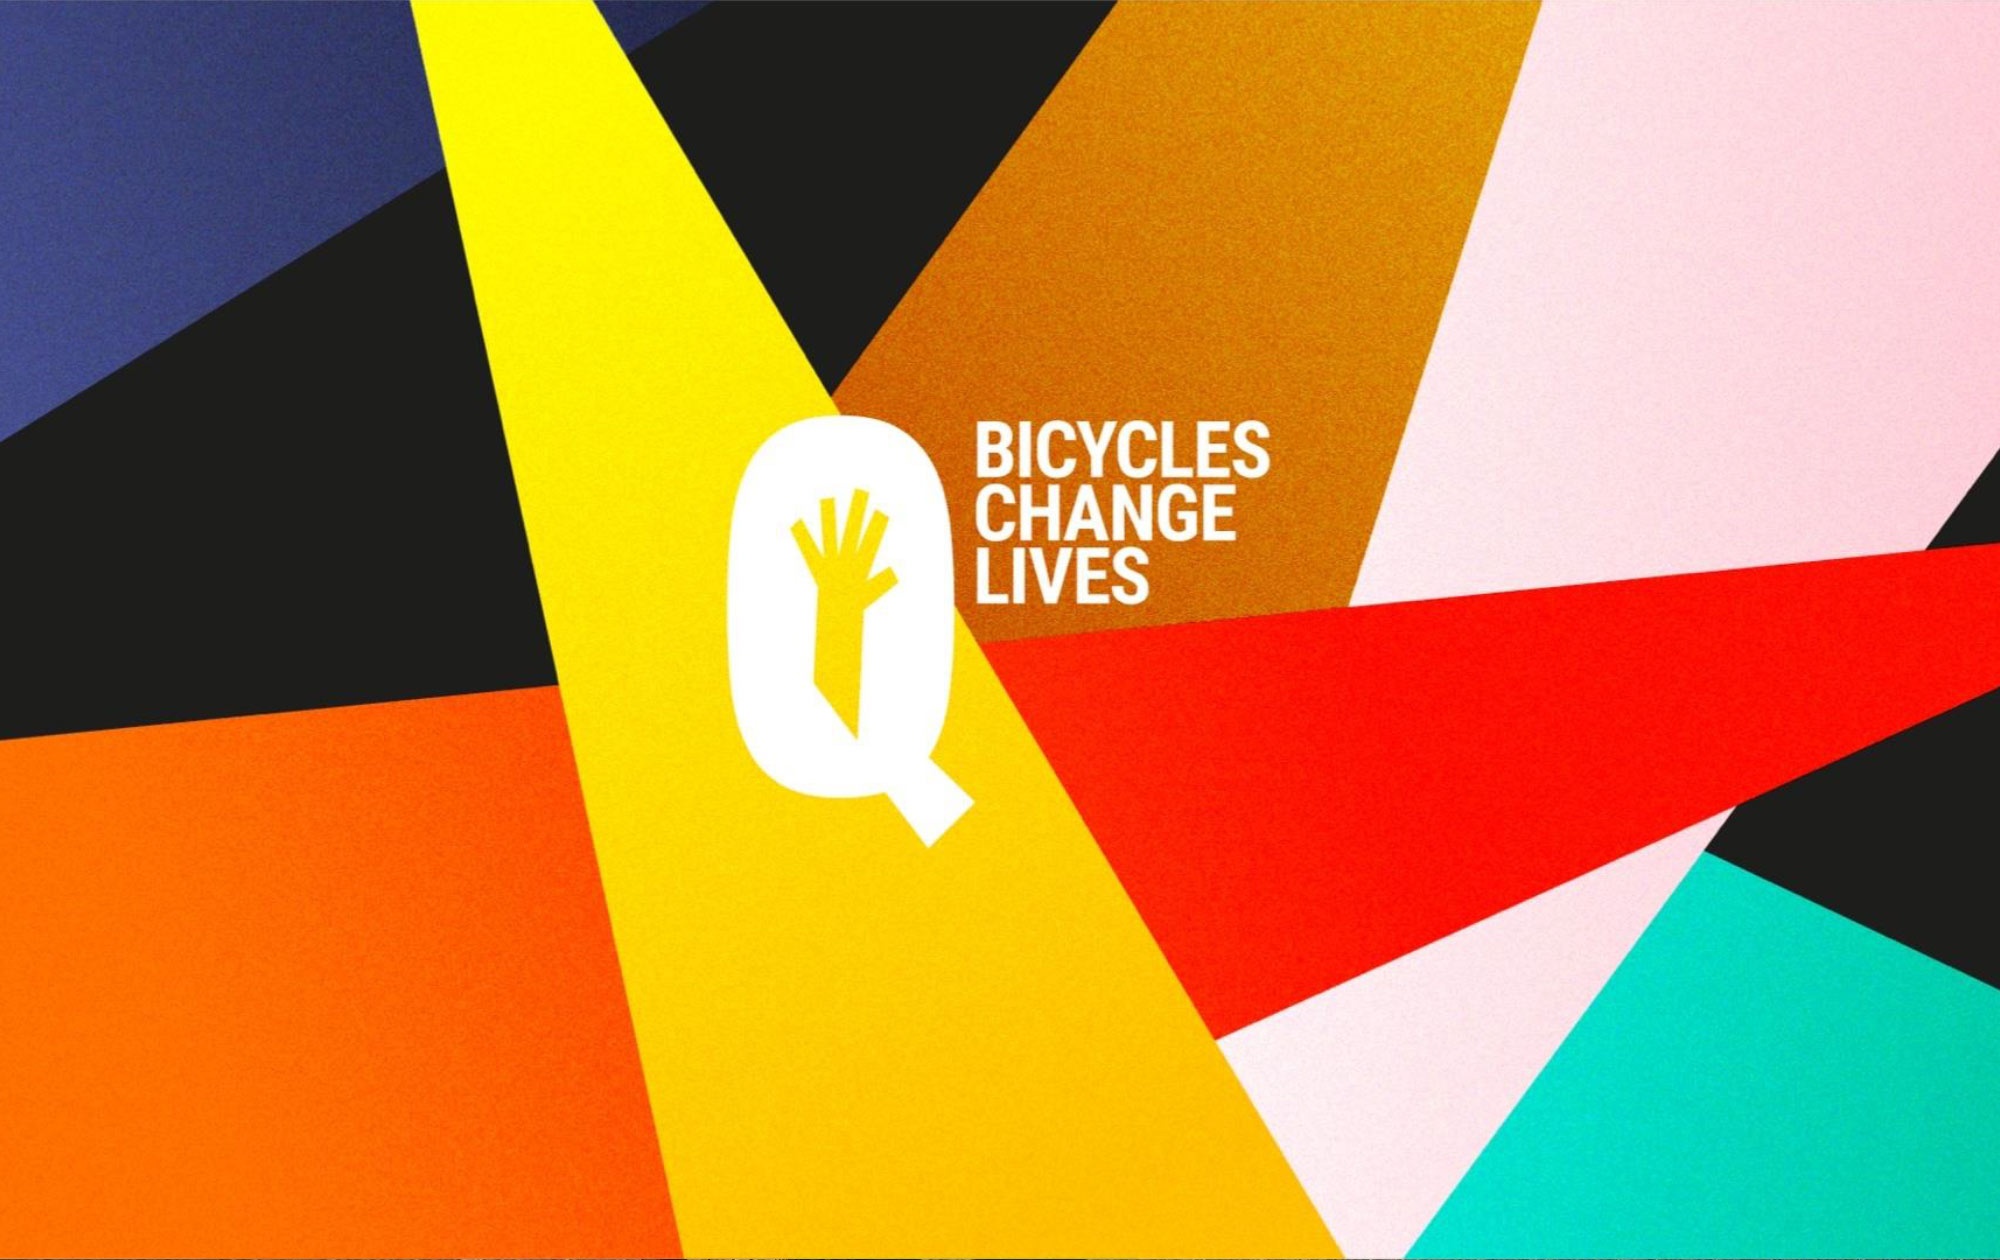 Bicycles change lives